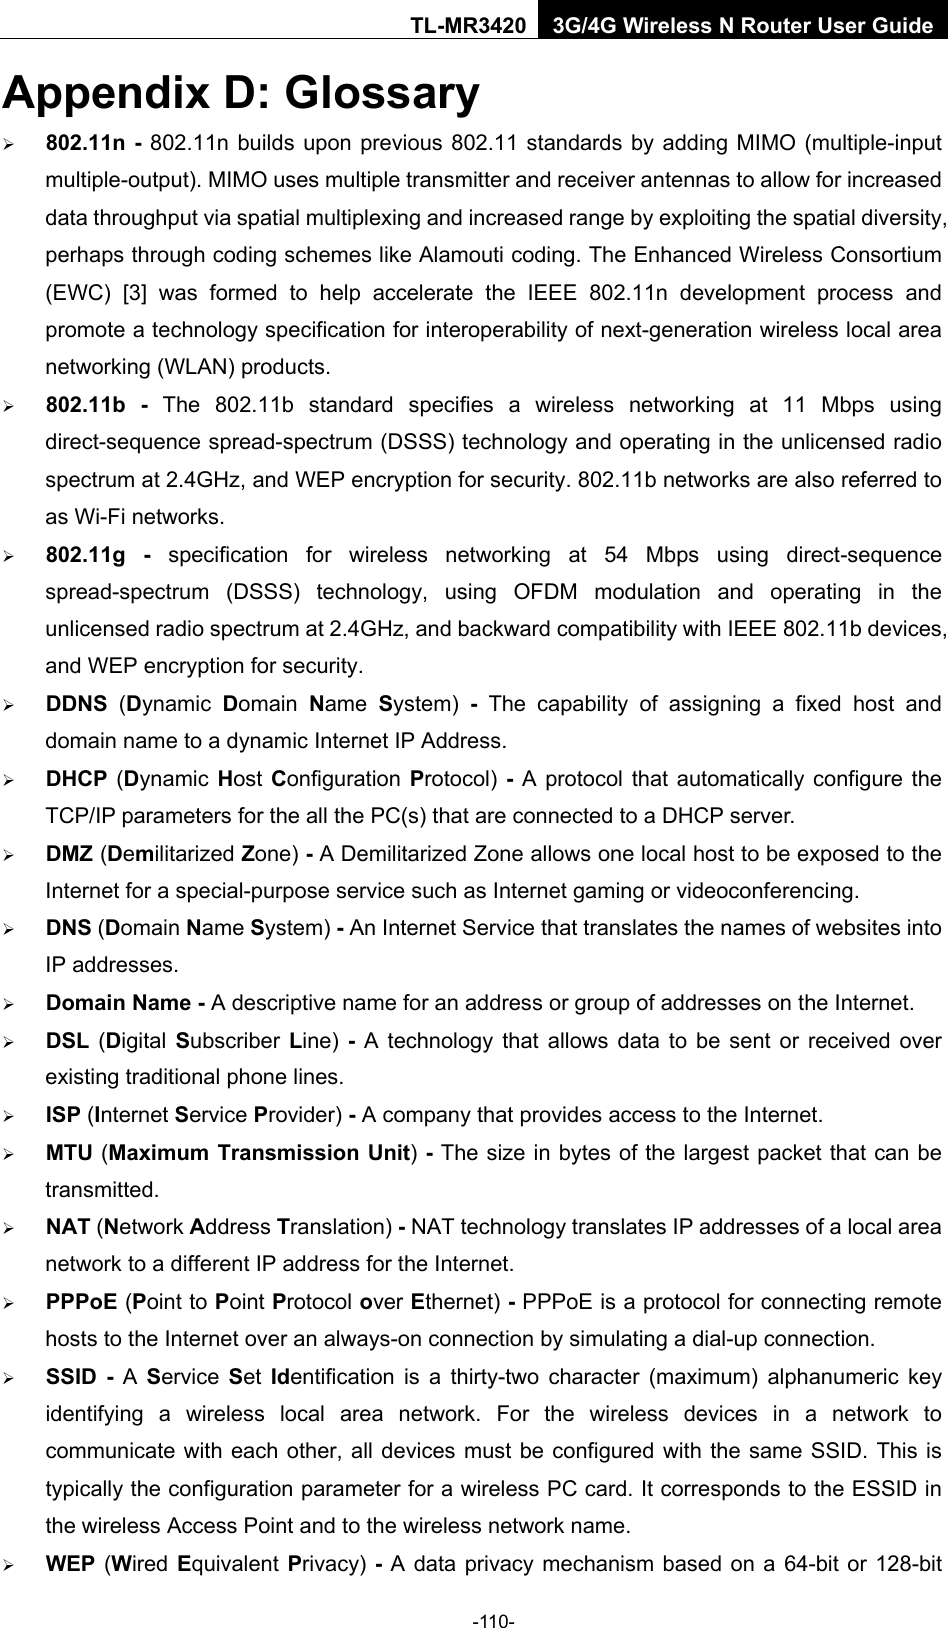    -110- TL-MR3420 3G/4G Wireless N Router User Guide Appendix D: Glossary  802.11n  - 802.11n builds upon previous 802.11 standards by adding MIMO (multiple-input multiple-output). MIMO uses multiple transmitter and receiver antennas to allow for increased data throughput via spatial multiplexing and increased range by exploiting the spatial diversity, perhaps through coding schemes like Alamouti coding. The Enhanced Wireless Consortium (EWC) [3] was formed to help accelerate the IEEE 802.11n development process and promote a technology specification for interoperability of next-generation wireless local area networking (WLAN) products.  802.11b  -  The 802.11b standard specifies a wireless networking at 11 Mbps using direct-sequence spread-spectrum (DSSS) technology and operating in the unlicensed radio spectrum at 2.4GHz, and WEP encryption for security. 802.11b networks are also referred to as Wi-Fi networks.  802.11g  -  specification for wireless networking at 54 Mbps using direct-sequence spread-spectrum (DSSS) technology, using OFDM modulation and operating in the unlicensed radio spectrum at 2.4GHz, and backward compatibility with IEEE 802.11b devices, and WEP encryption for security.  DDNS  (Dynamic  Domain  Name  System) - The capability of assigning a fixed host and domain name to a dynamic Internet IP Address.    DHCP  (Dynamic  Host Configuration Protocol) - A protocol that automatically configure the TCP/IP parameters for the all the PC(s) that are connected to a DHCP server.  DMZ (Demilitarized Zone) - A Demilitarized Zone allows one local host to be exposed to the Internet for a special-purpose service such as Internet gaming or videoconferencing.  DNS (Domain Name System) - An Internet Service that translates the names of websites into IP addresses.  Domain Name - A descriptive name for an address or group of addresses on the Internet.    DSL  (Digital  Subscriber  Line)  - A technology that allows data to be sent or received over existing traditional phone lines.  ISP (Internet Service Provider) - A company that provides access to the Internet.  MTU (Maximum Transmission Unit) - The size in bytes of the largest packet that can be transmitted.  NAT (Network Address Translation) - NAT technology translates IP addresses of a local area network to a different IP address for the Internet.  PPPoE (Point to Point Protocol over Ethernet) - PPPoE is a protocol for connecting remote hosts to the Internet over an always-on connection by simulating a dial-up connection.  SSID  -  A  Service  Set  Identification is a thirty-two character (maximum) alphanumeric key identifying a wireless local area network. For the wireless devices in a network to communicate with each other, all devices must be configured with the same SSID. This is typically the configuration parameter for a wireless PC card. It corresponds to the ESSID in the wireless Access Point and to the wireless network name.    WEP (Wired Equivalent Privacy) - A data privacy mechanism based on a 64-bit or 128-bit 